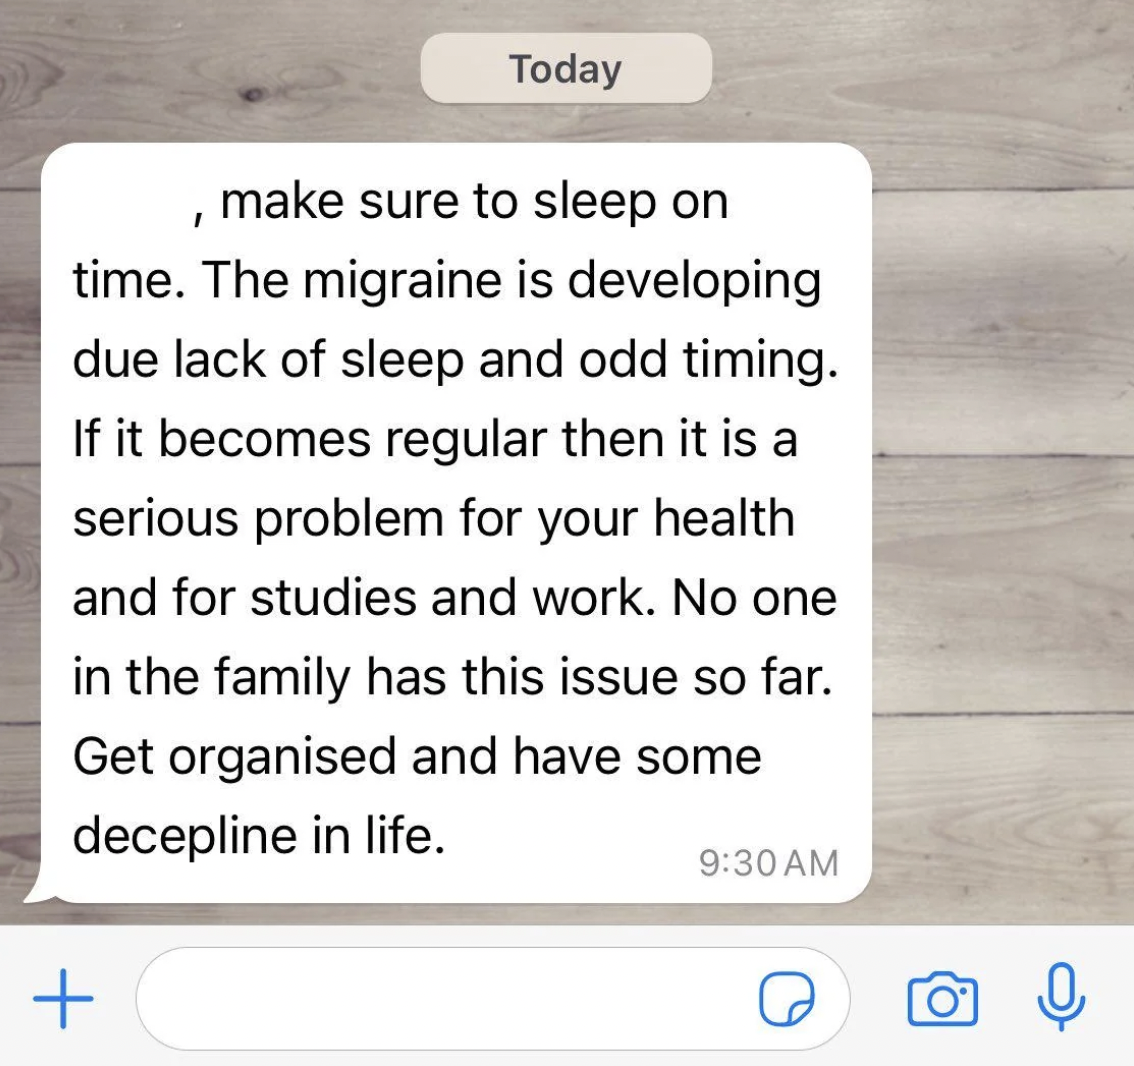 screenshot - Today make sure to sleep on time. The migraine is developing due lack of sleep and odd timing. If it becomes regular then it is a serious problem for your health and for studies and work. No one in the family has this issue so far. Get organi